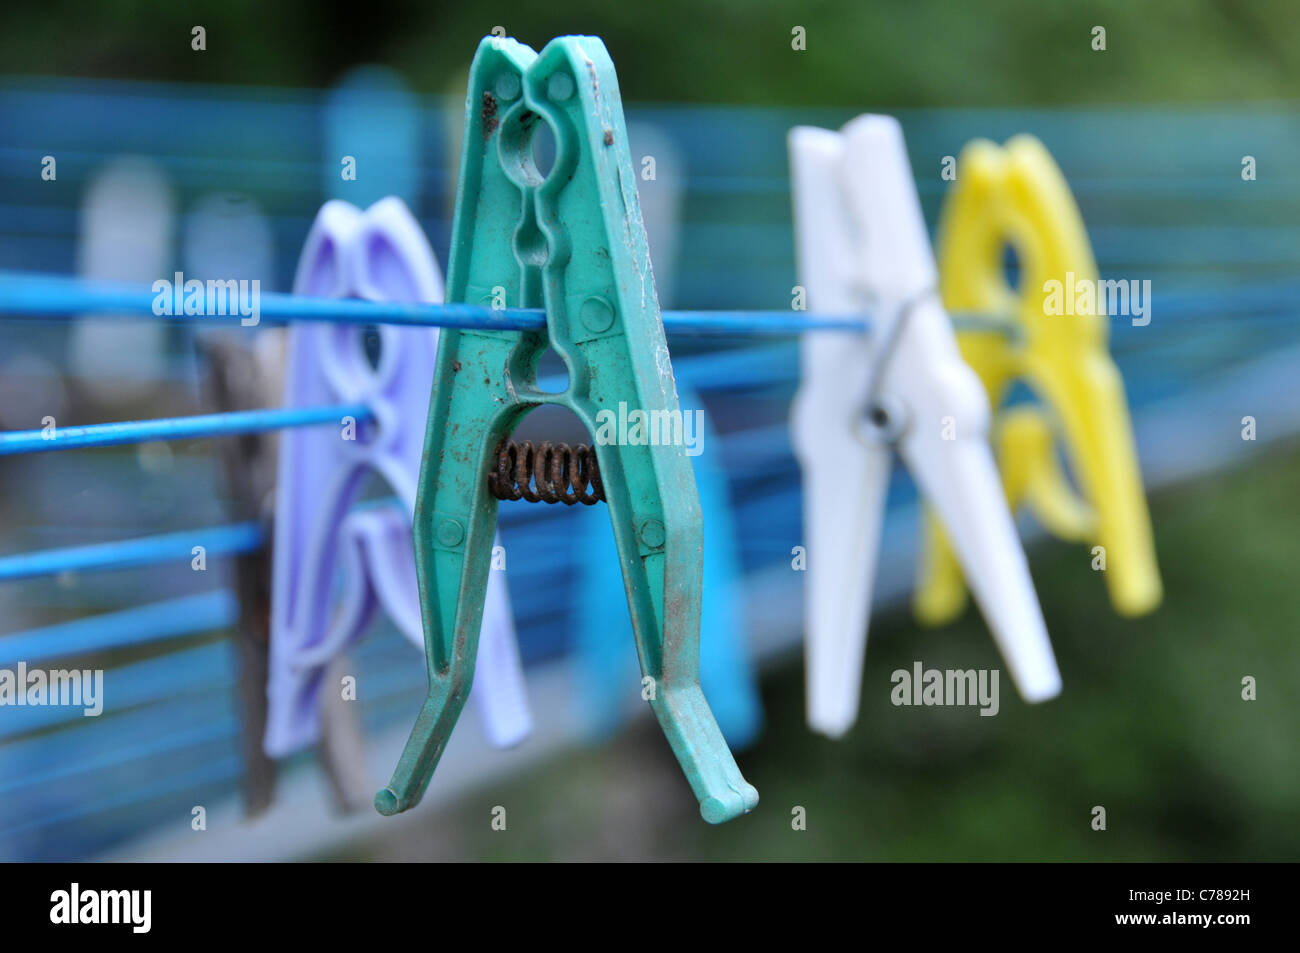 Clothes pegs washing line out of focus plastic bright colours Stock Photo